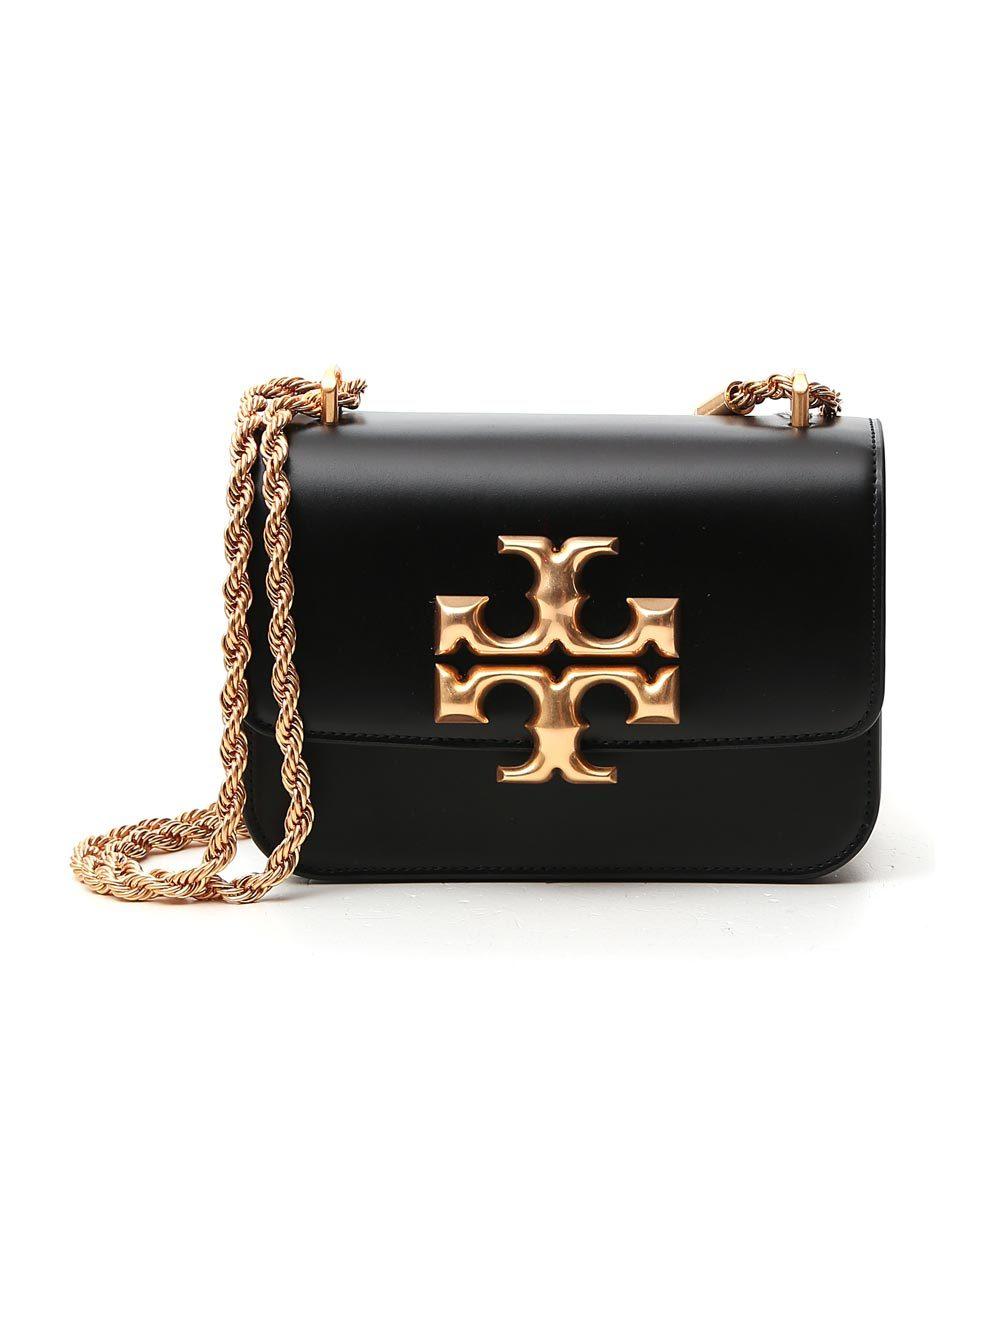 Tory Burch Leather Eleanor Small Convertible Shoulder Bag in Black - Lyst